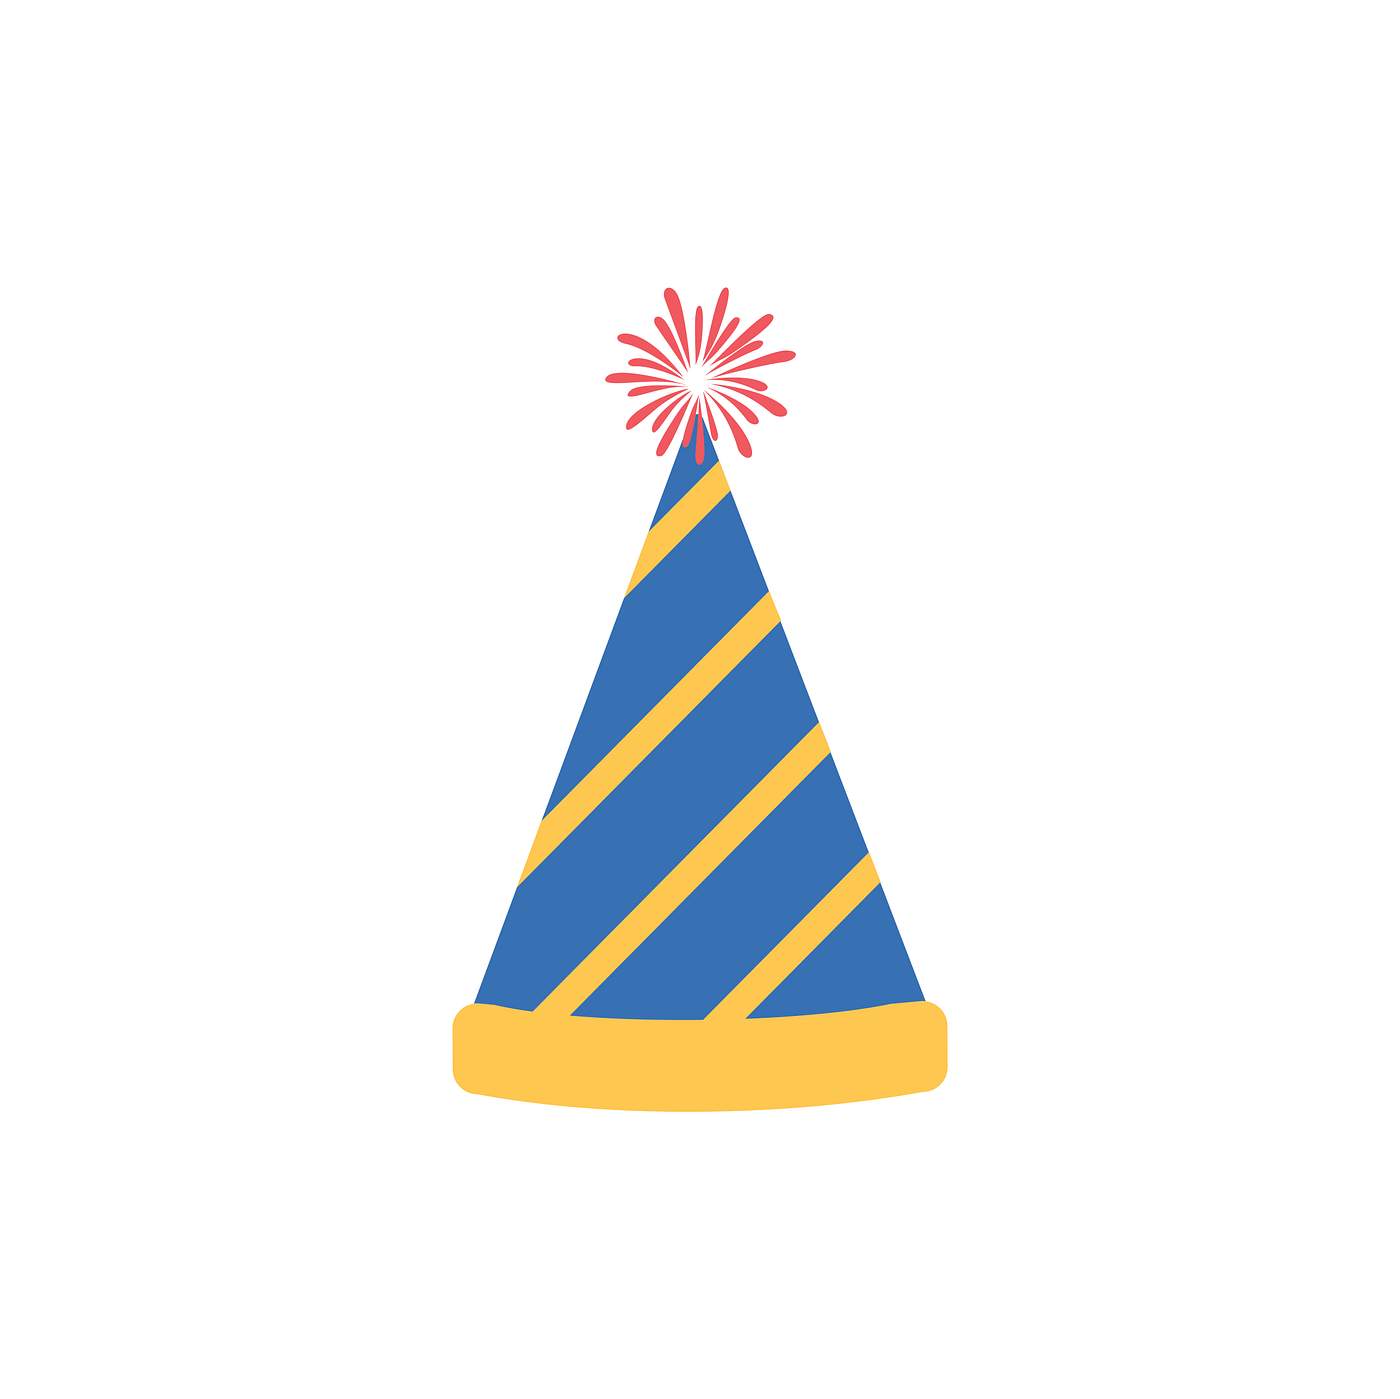 Download Illustration of party hat icon | Free vector - 266656